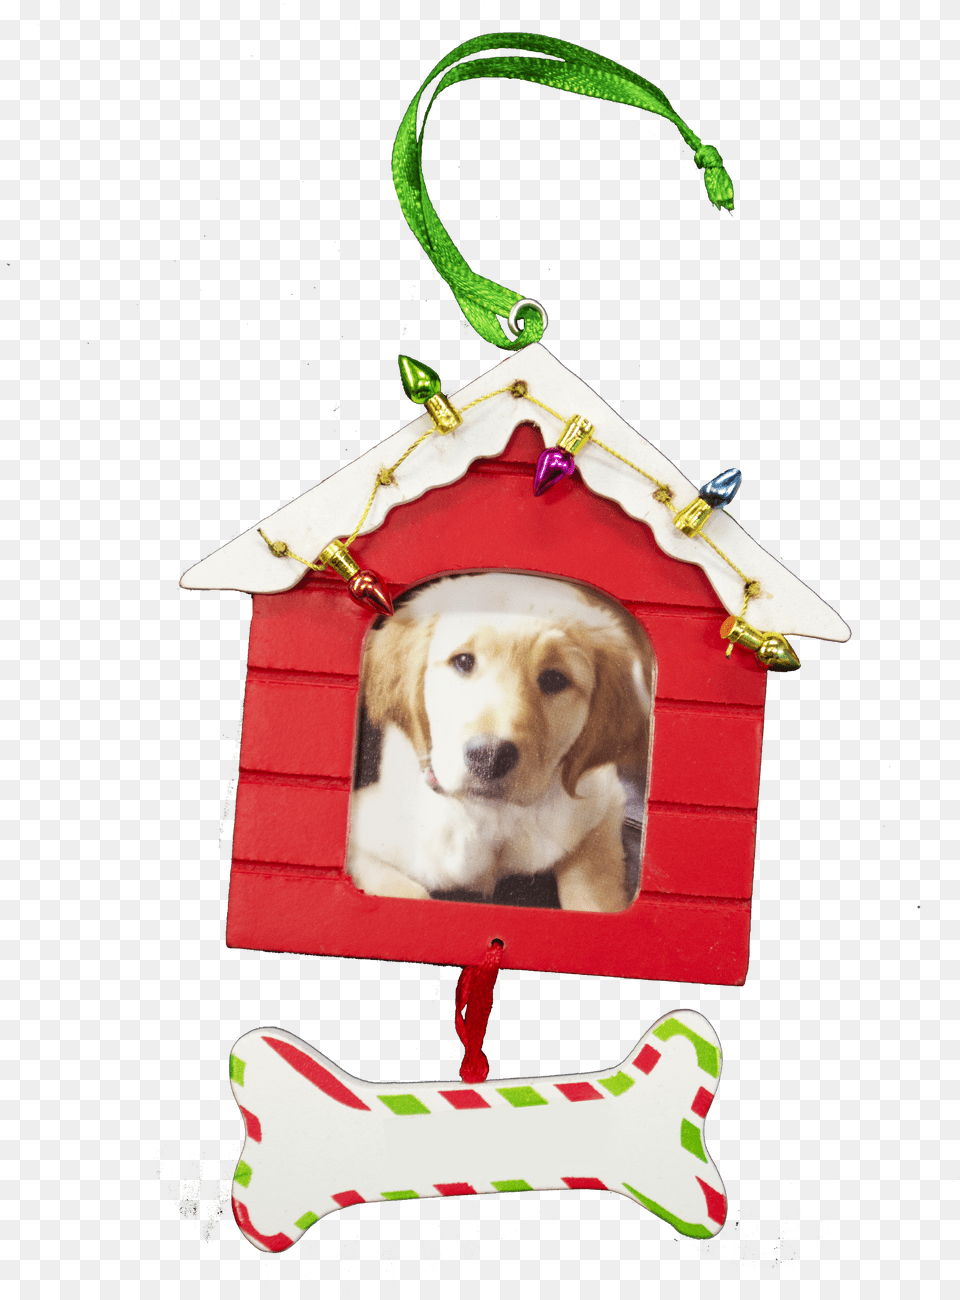 Doghouse Ornament Green Candy Cane Free Transparent Png